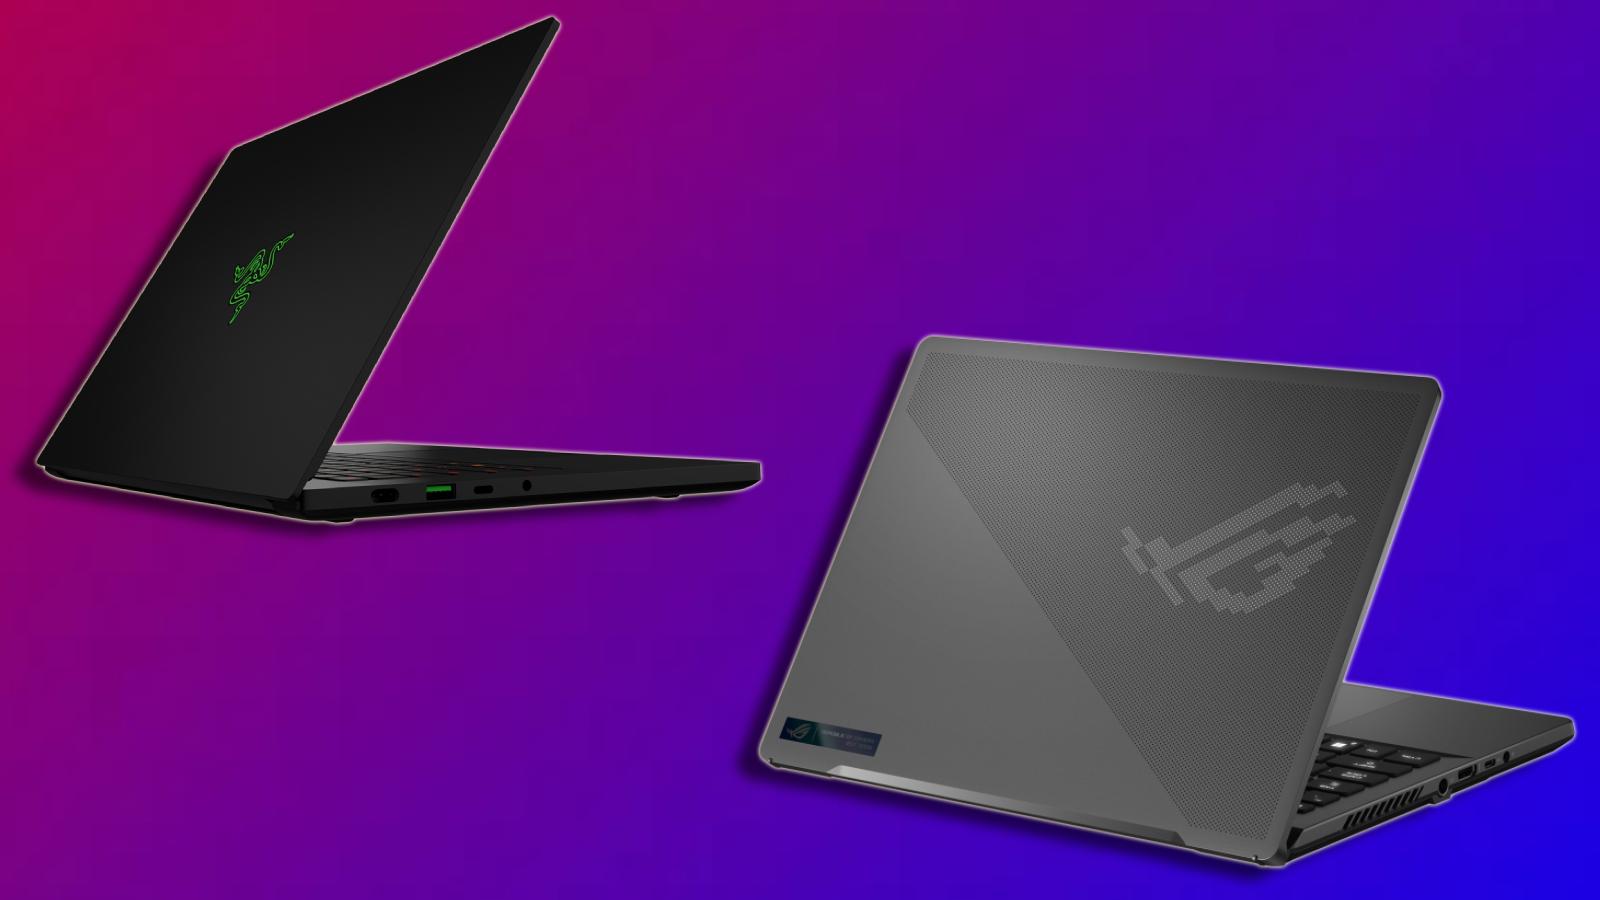 The Zephyrus G14: the world's most powerful 14-inch gaming laptop